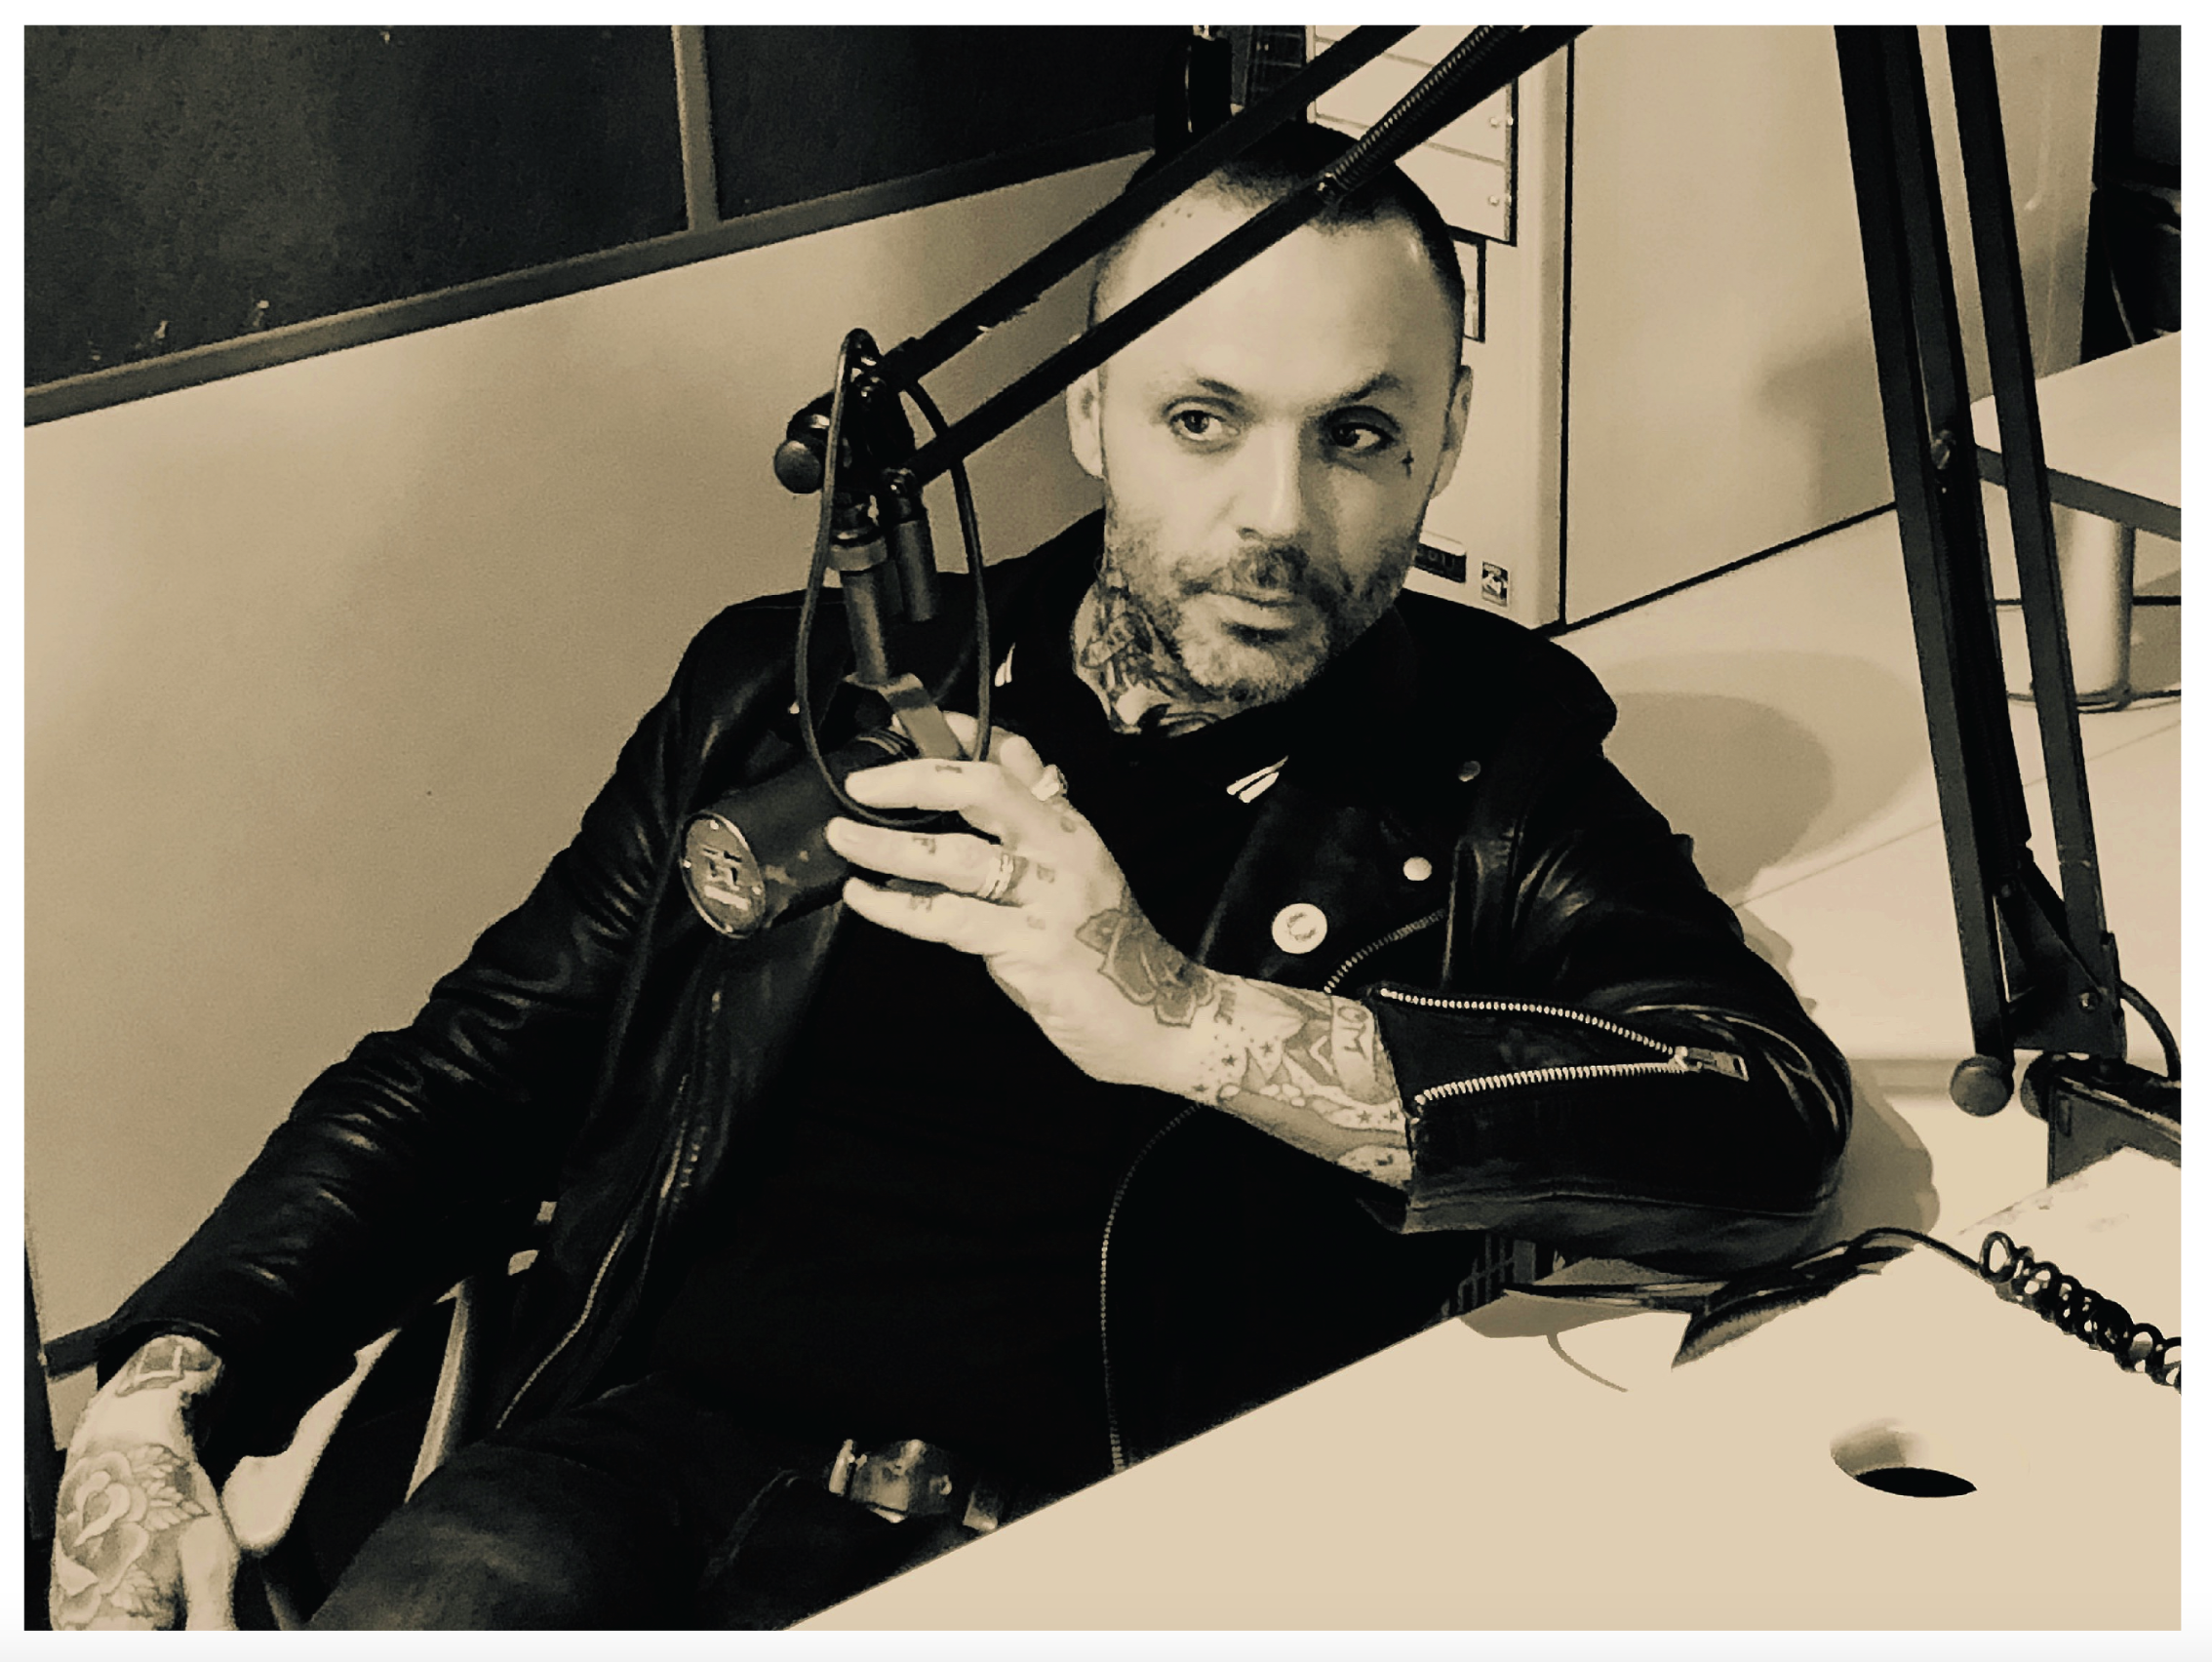 About Fan Engagement - Justin Furstenfeld